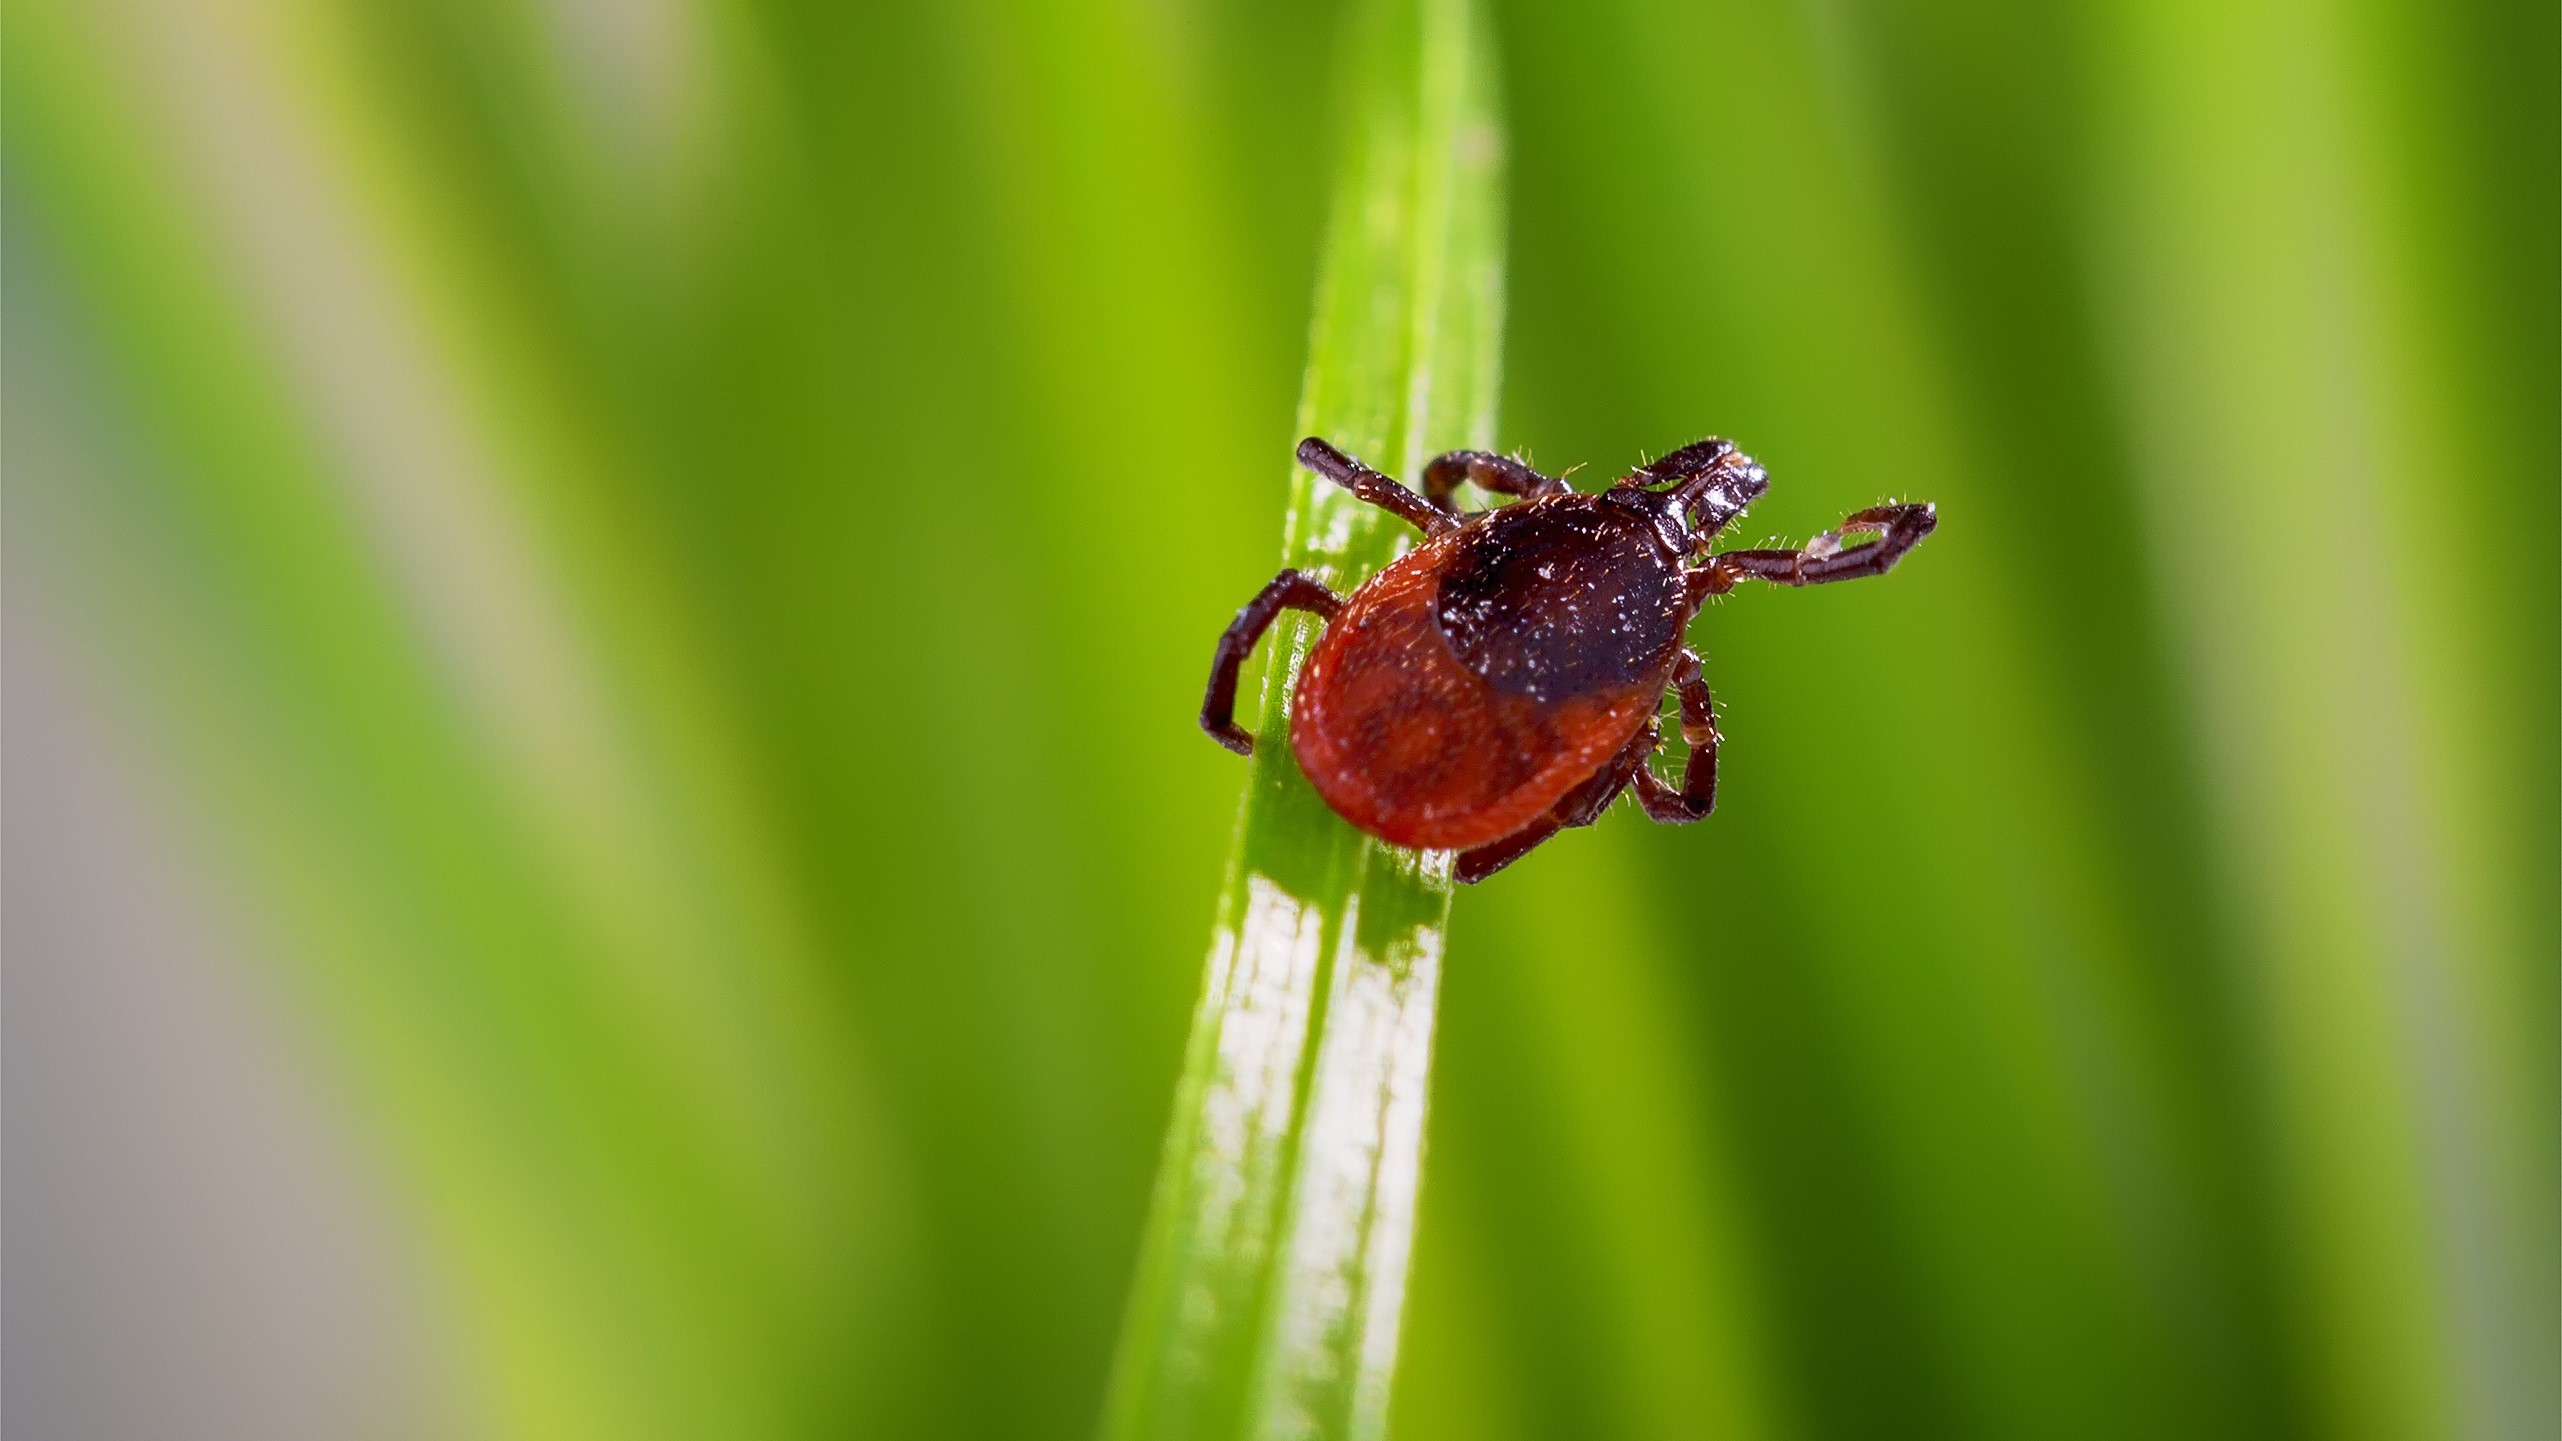 Death from rare tick-borne virus reported in Maine | Live Science